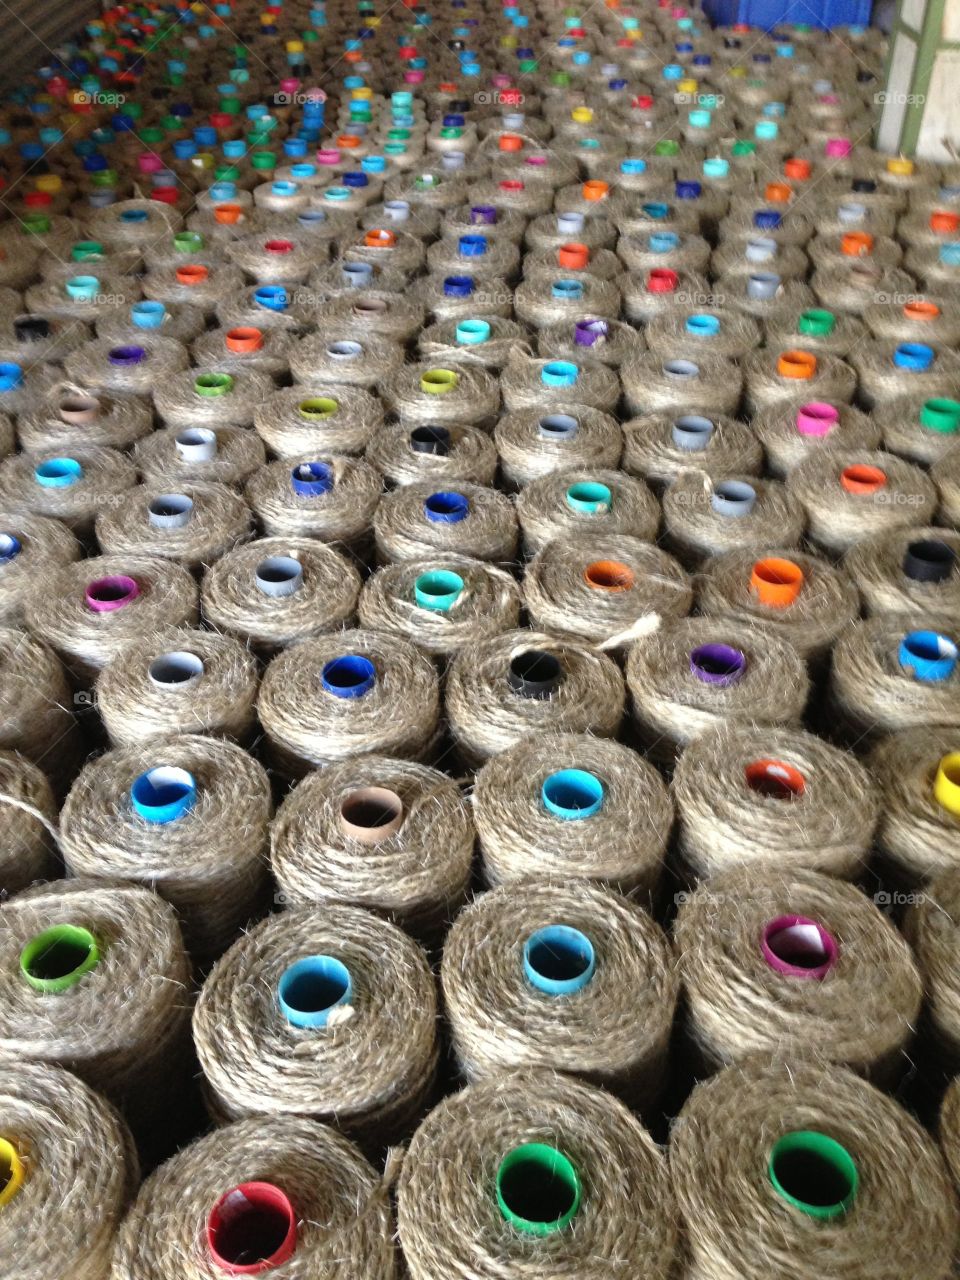 jute spools in home decor factory producing rugs, international travel to tour manufacturers